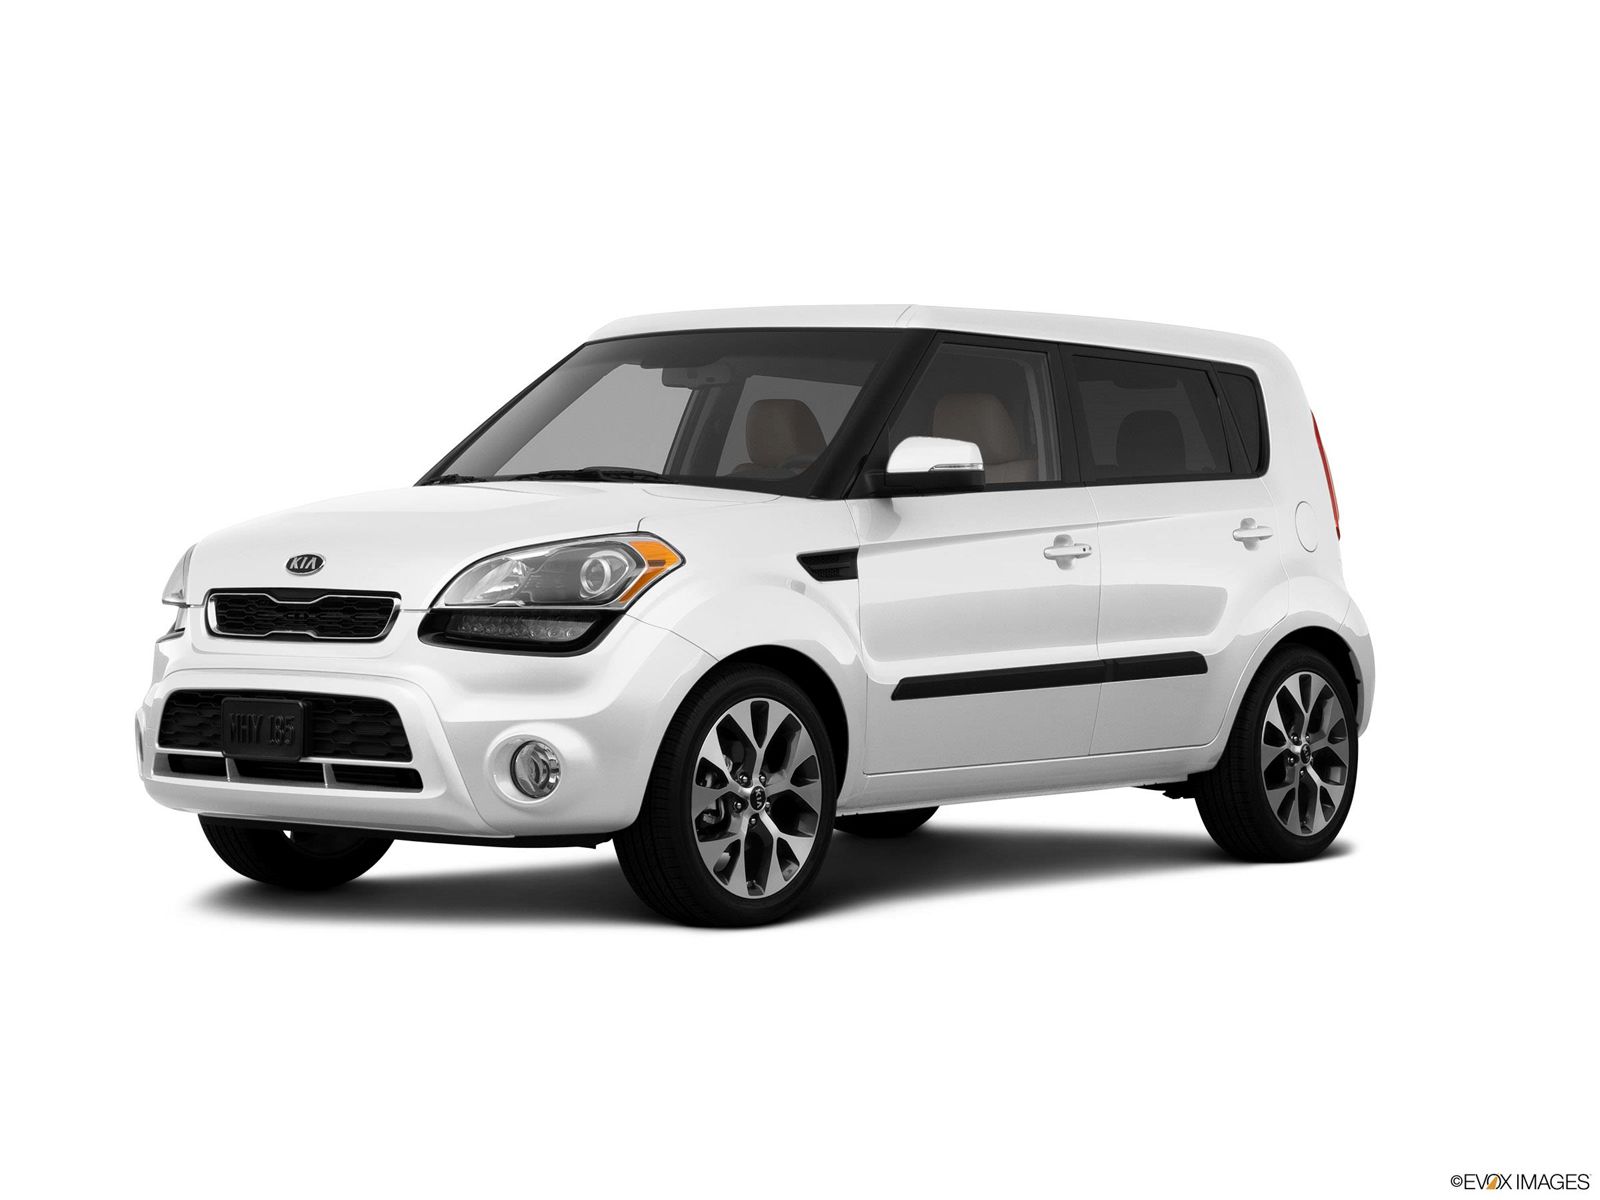 2012 Kia Soul Research, Photos, Specs and Expertise | CarMax